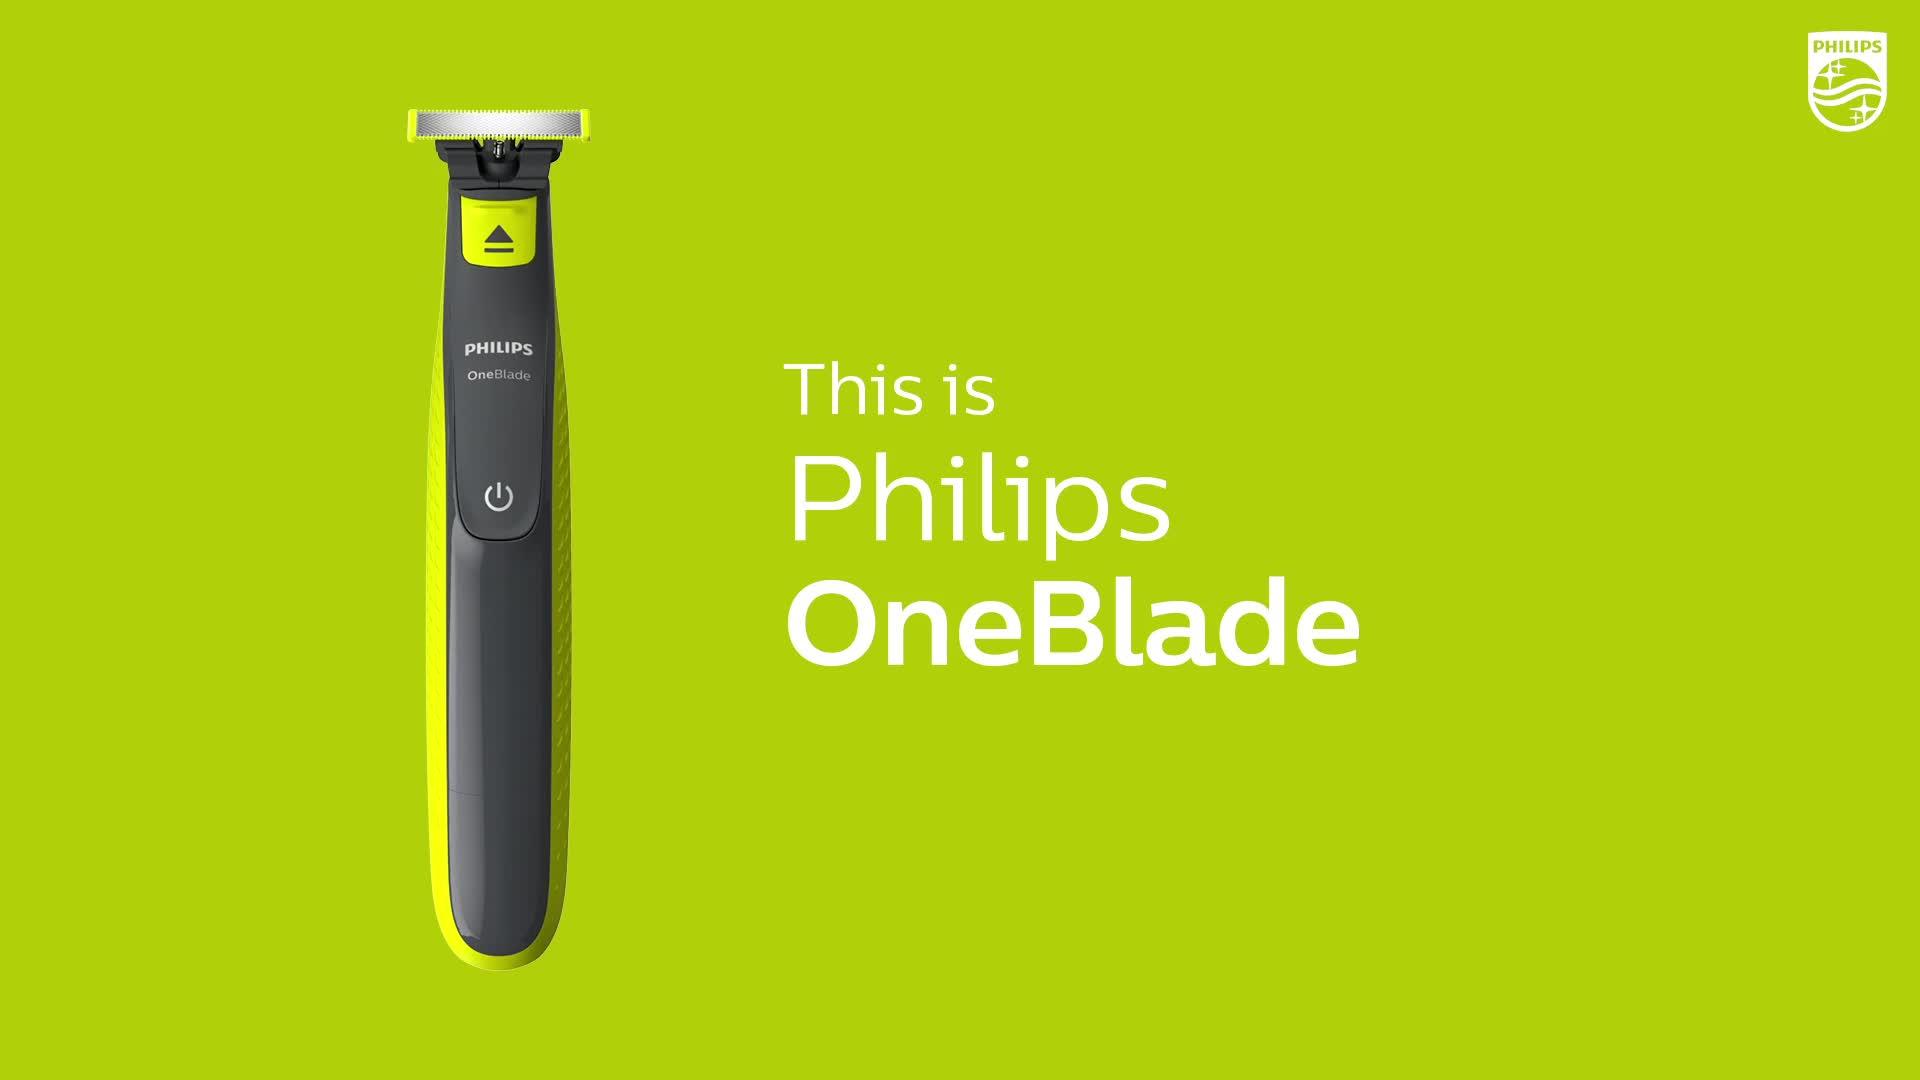 philips innovation one blade